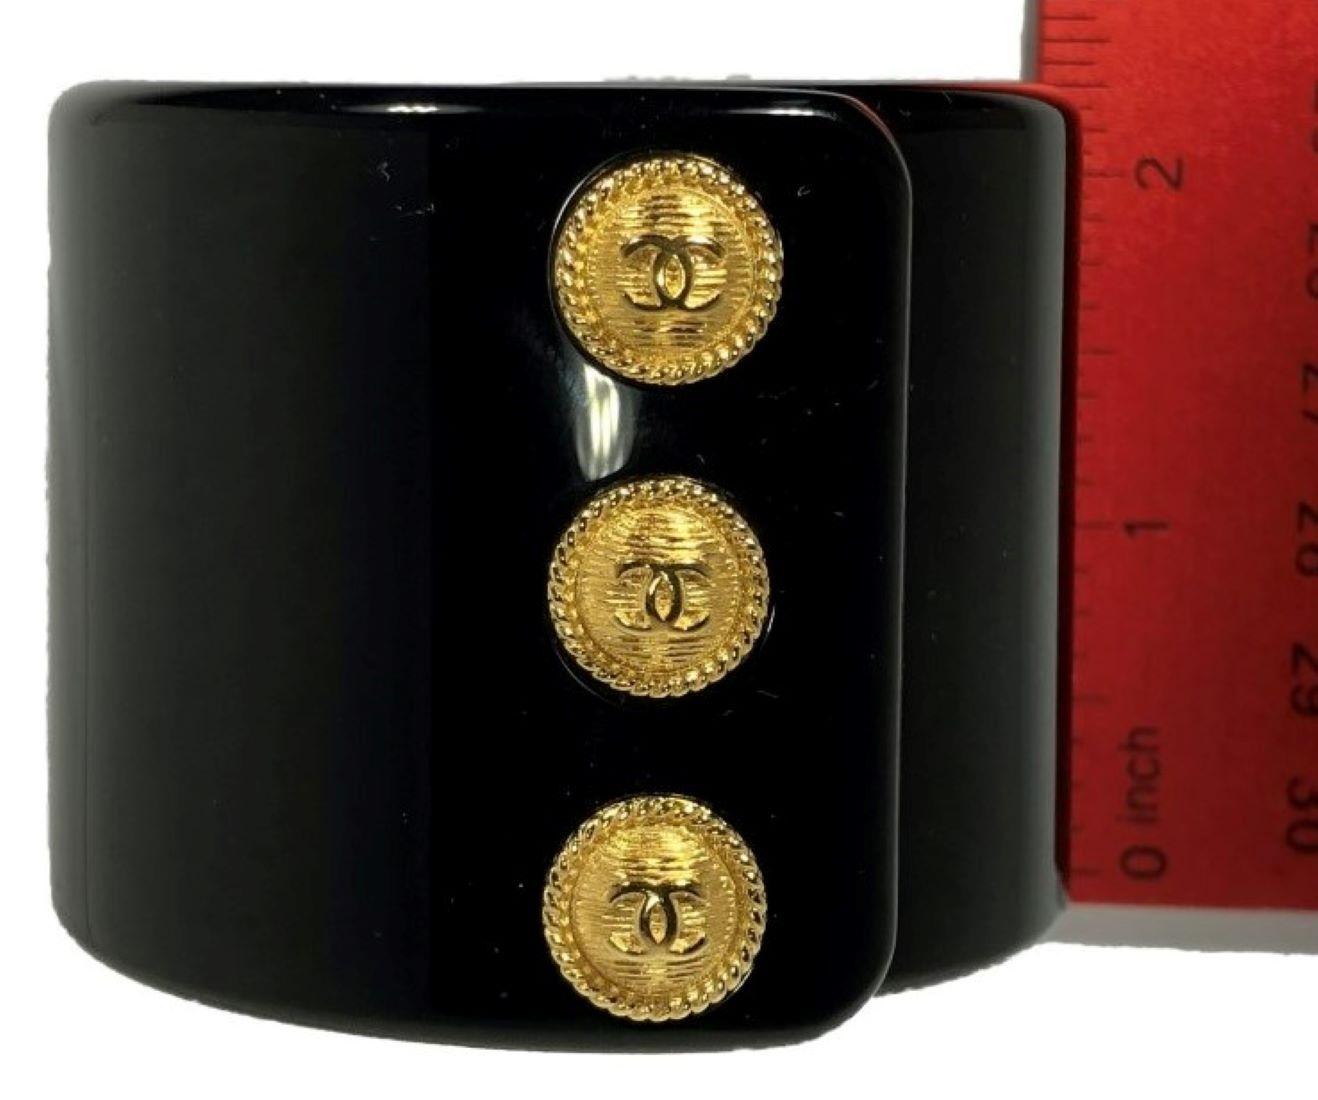 Chanel Black Resin 3 Button Cuff Bracelet 2018 Fall Collection For Sale 3